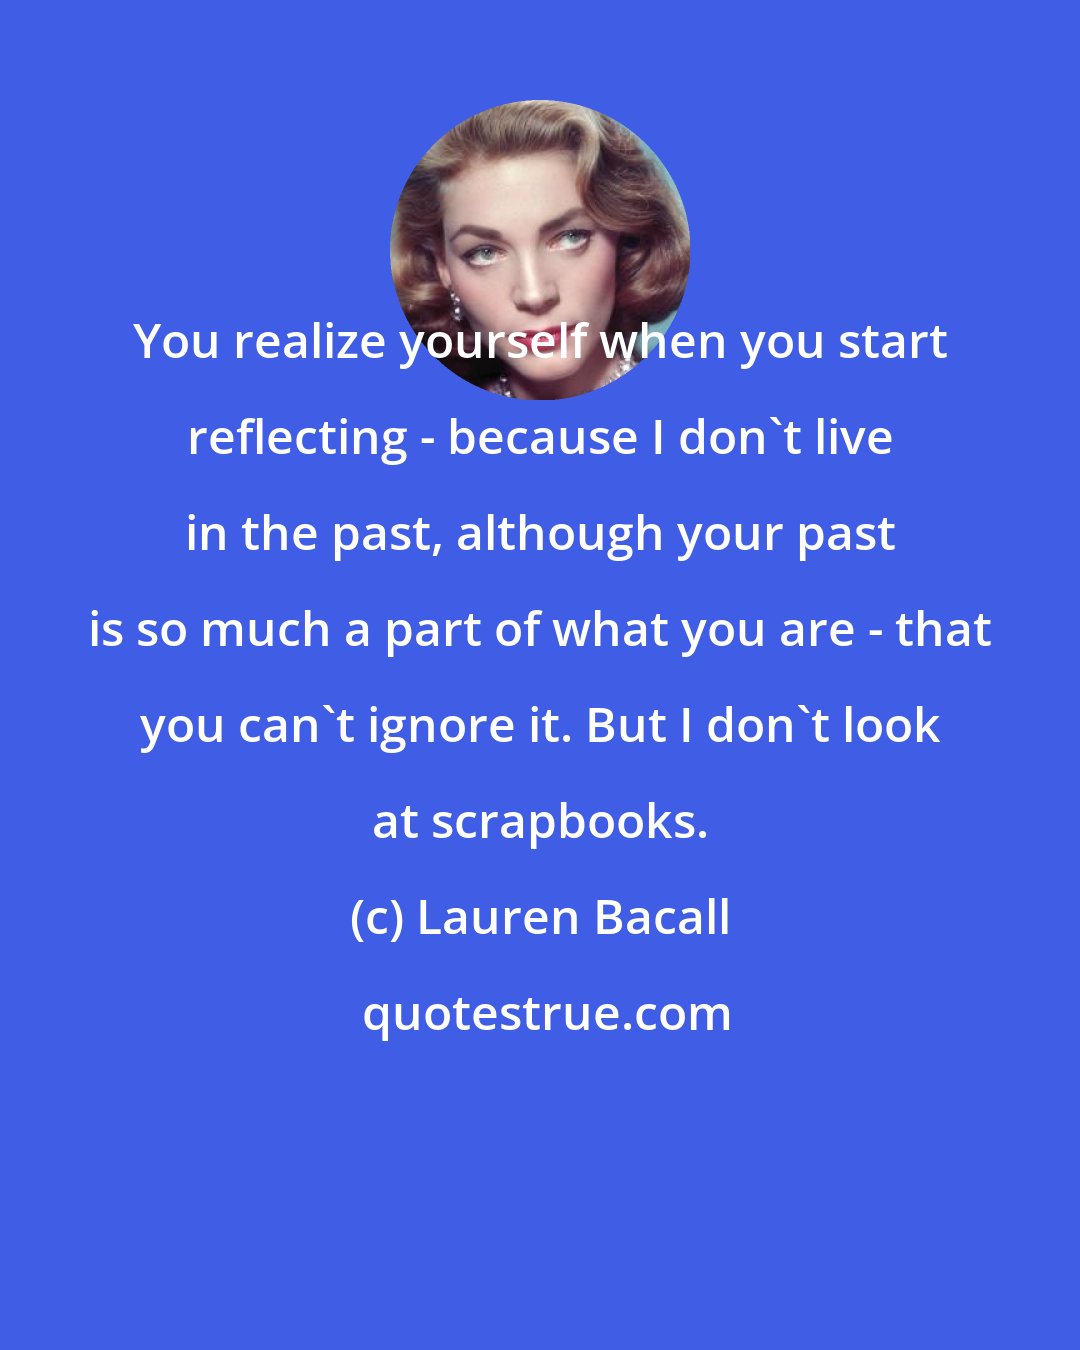 Lauren Bacall: You realize yourself when you start reflecting - because I don't live in the past, although your past is so much a part of what you are - that you can't ignore it. But I don't look at scrapbooks.